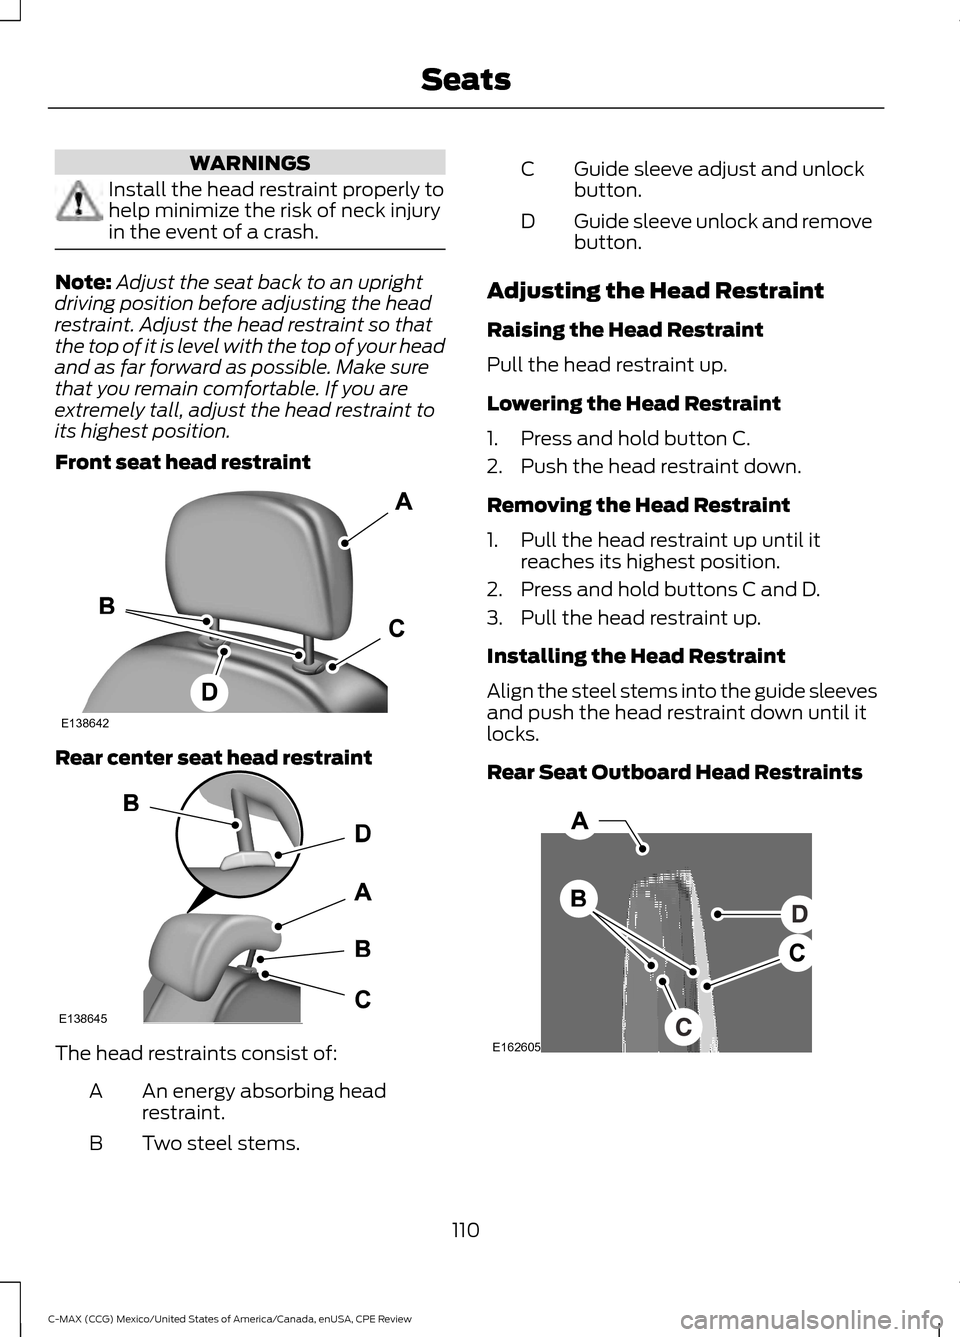 FORD C MAX HYBRID 2015 2.G Owners Manual WARNINGS
Install the head restraint properly to
help minimize the risk of neck injury
in the event of a crash.
Note:
Adjust the seat back to an upright
driving position before adjusting the head
restr